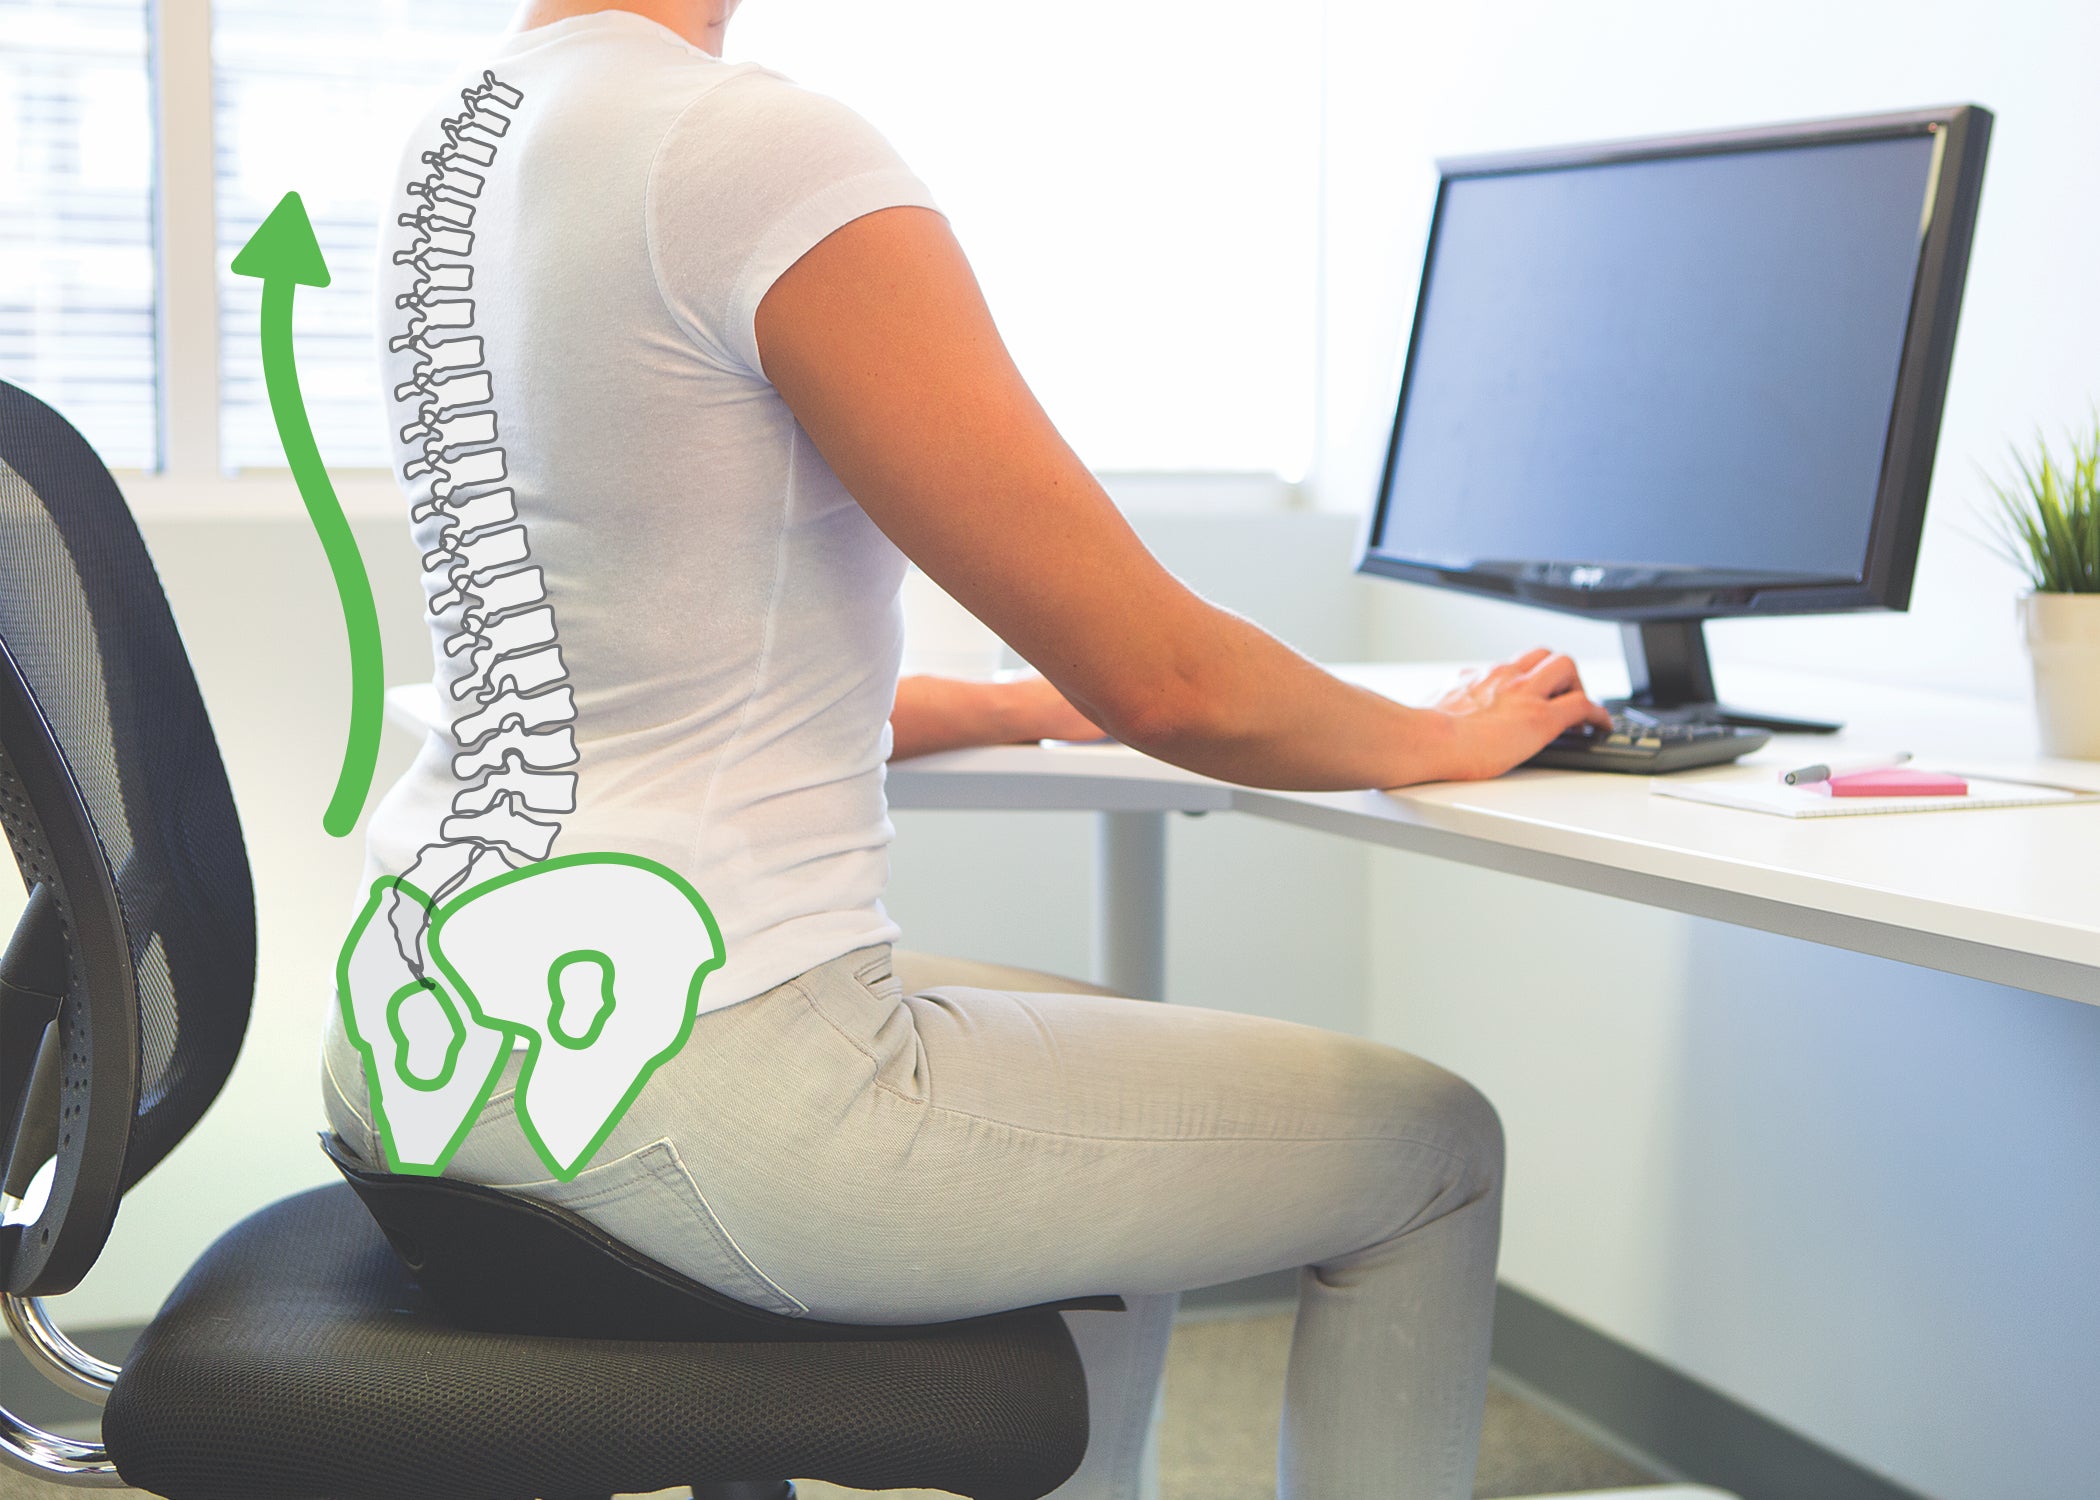 Backjoy Sitsmart Posture Plus  Fitterfirst's Active Office Equipment - USA  Fitterfirst